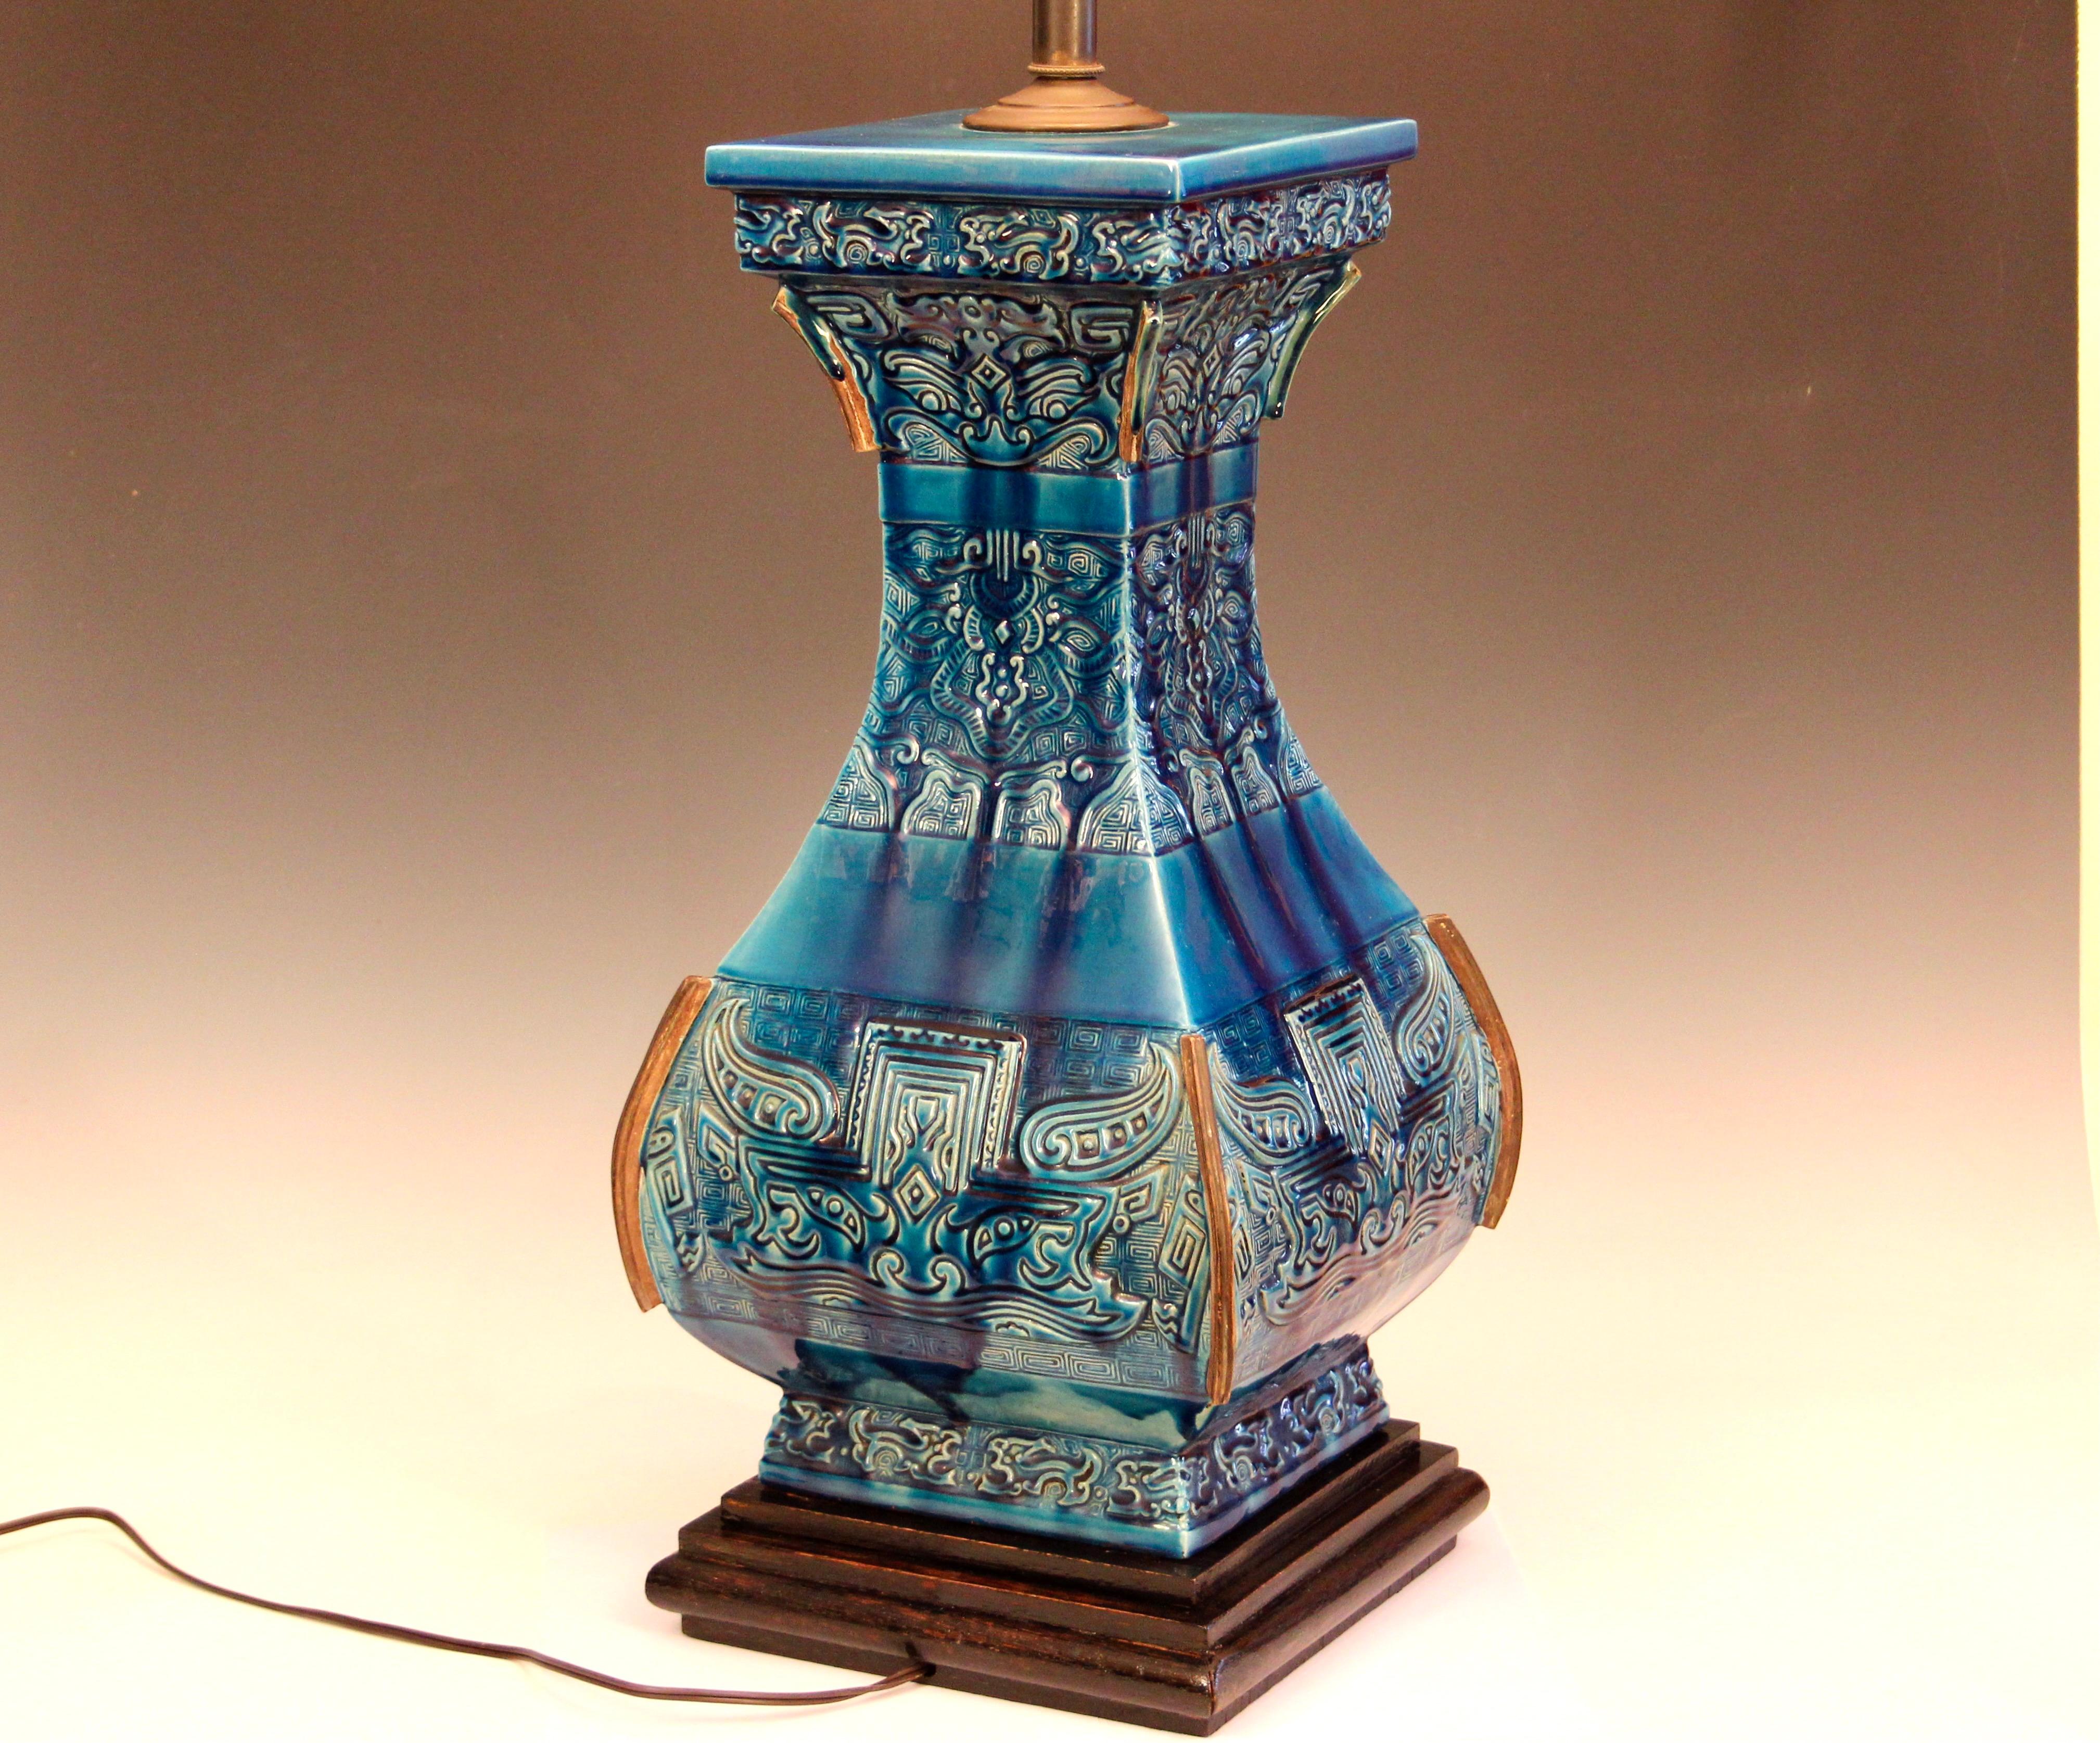 Huge Zaccagnini Pottery Mid Century Italian Ming Lamp Vintage 1950's Turquoise In Good Condition For Sale In Wilton, CT